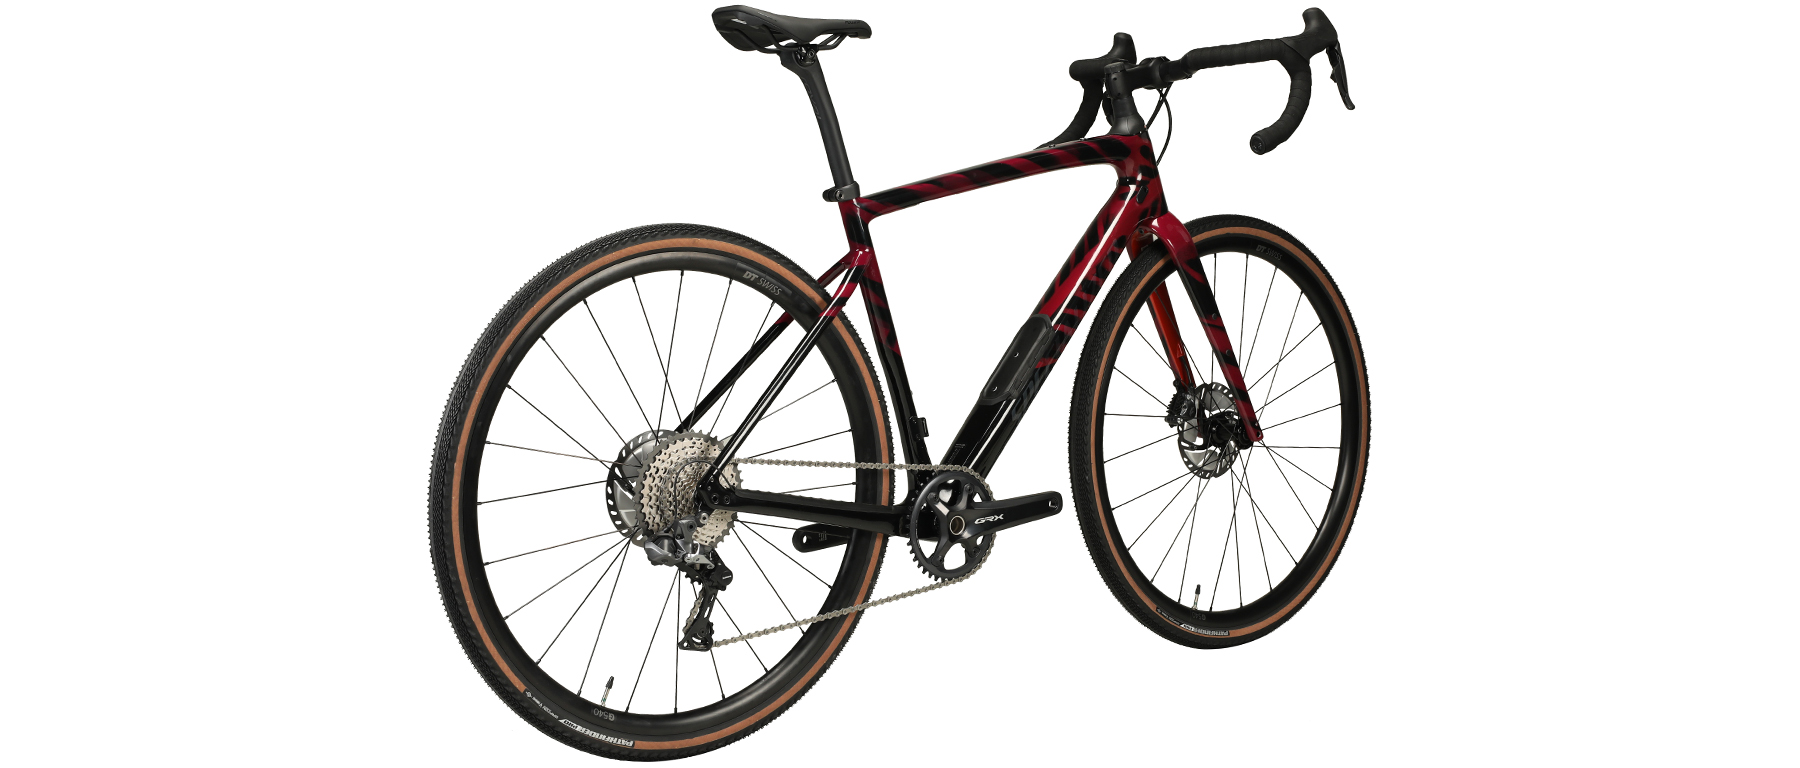 Specialized Diverge Expert Carbon Bicycle